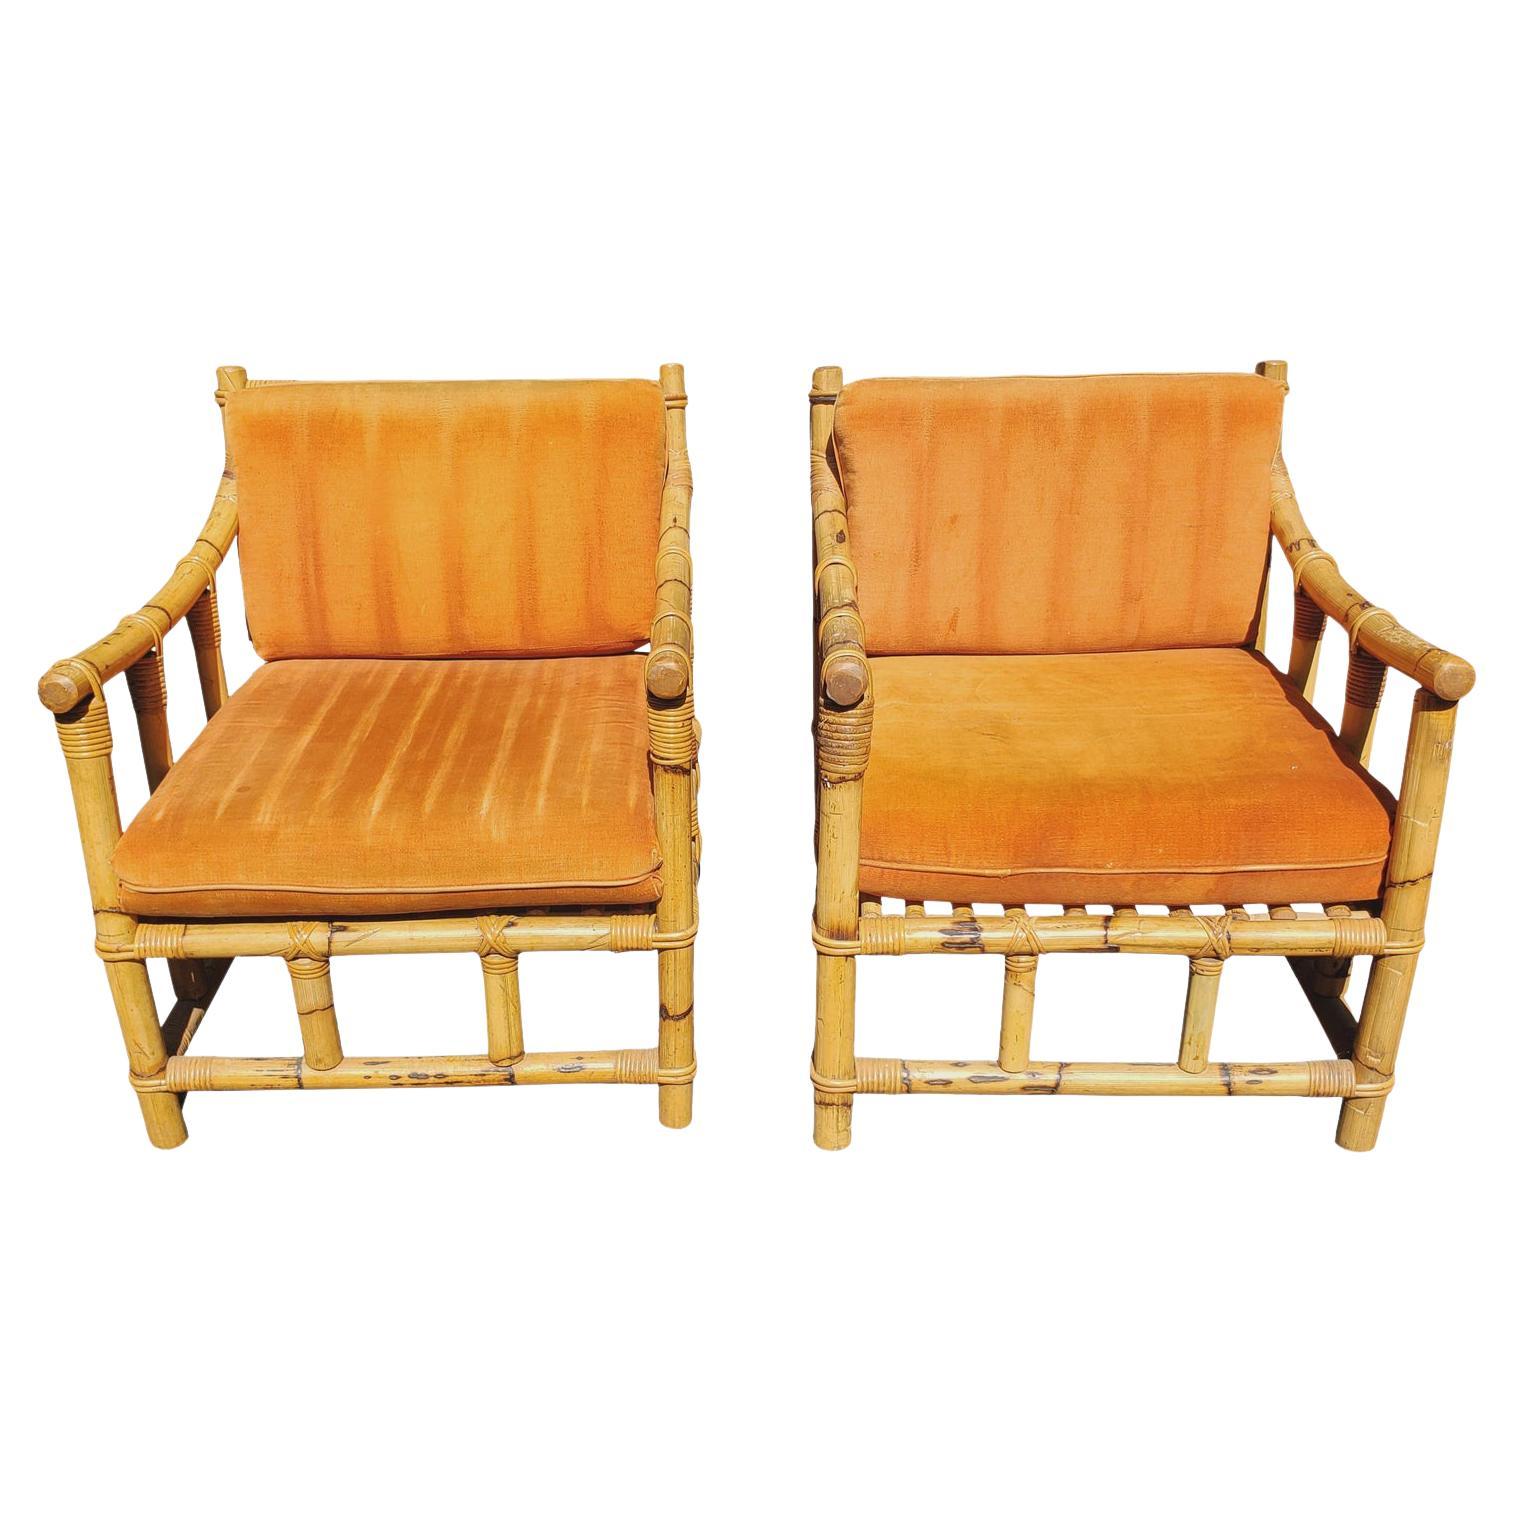 1950s Vintage Bamboo Lounge Chairs, a Pair